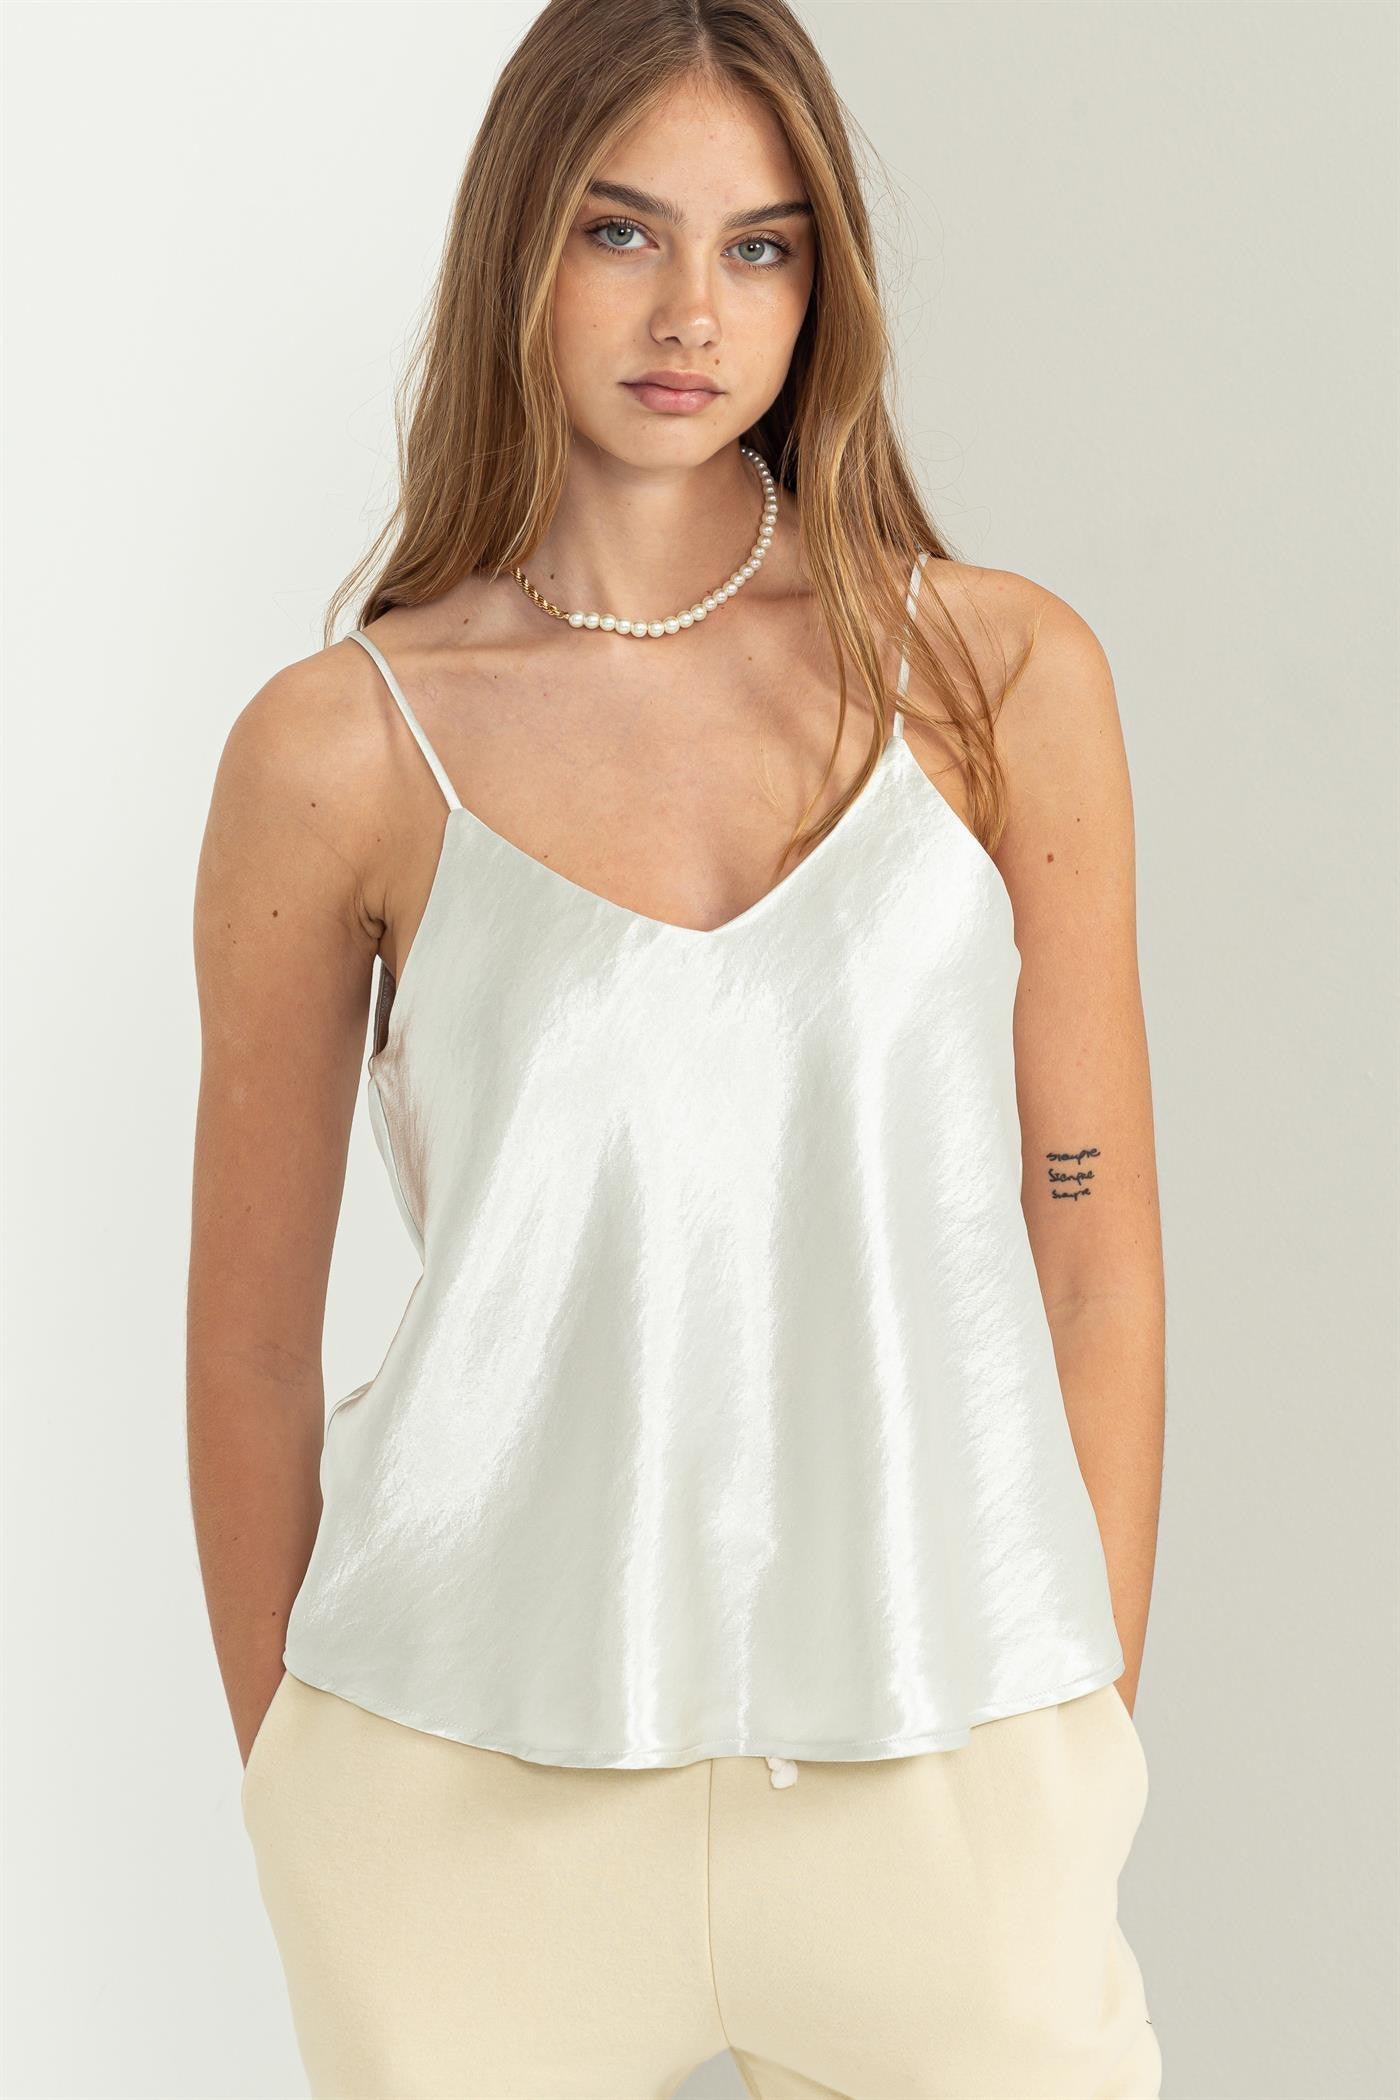 satin v neck camisole - RK Collections Boutique